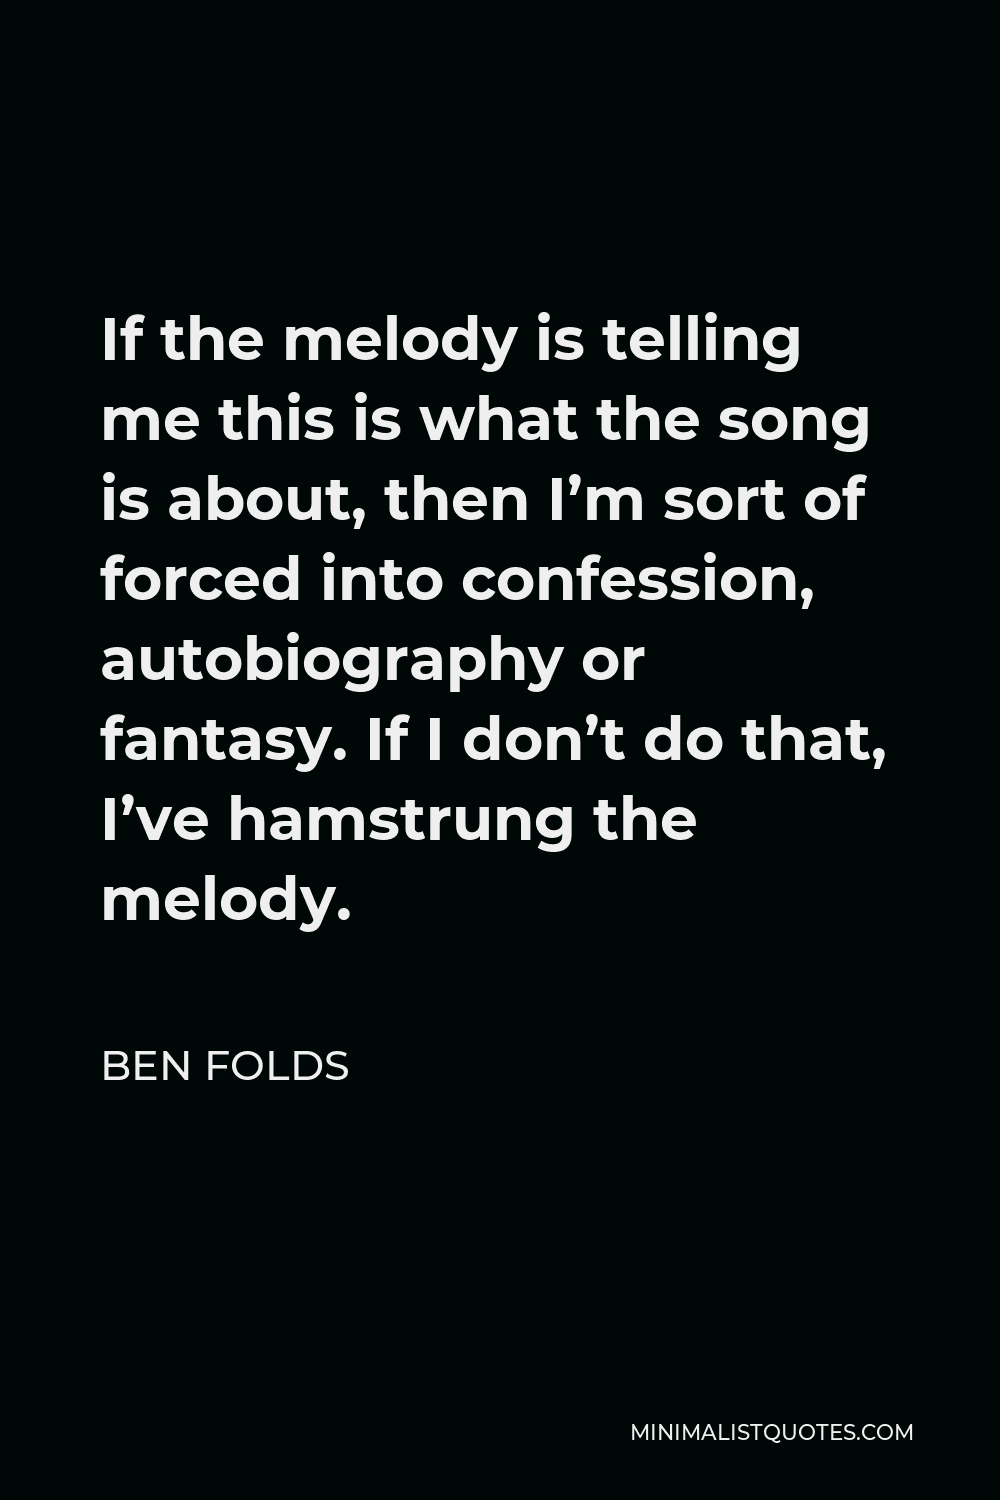 Ben Folds Quote - If the melody is telling me this is what the song is about, then I’m sort of forced into confession, autobiography or fantasy. If I don’t do that, I’ve hamstrung the melody.